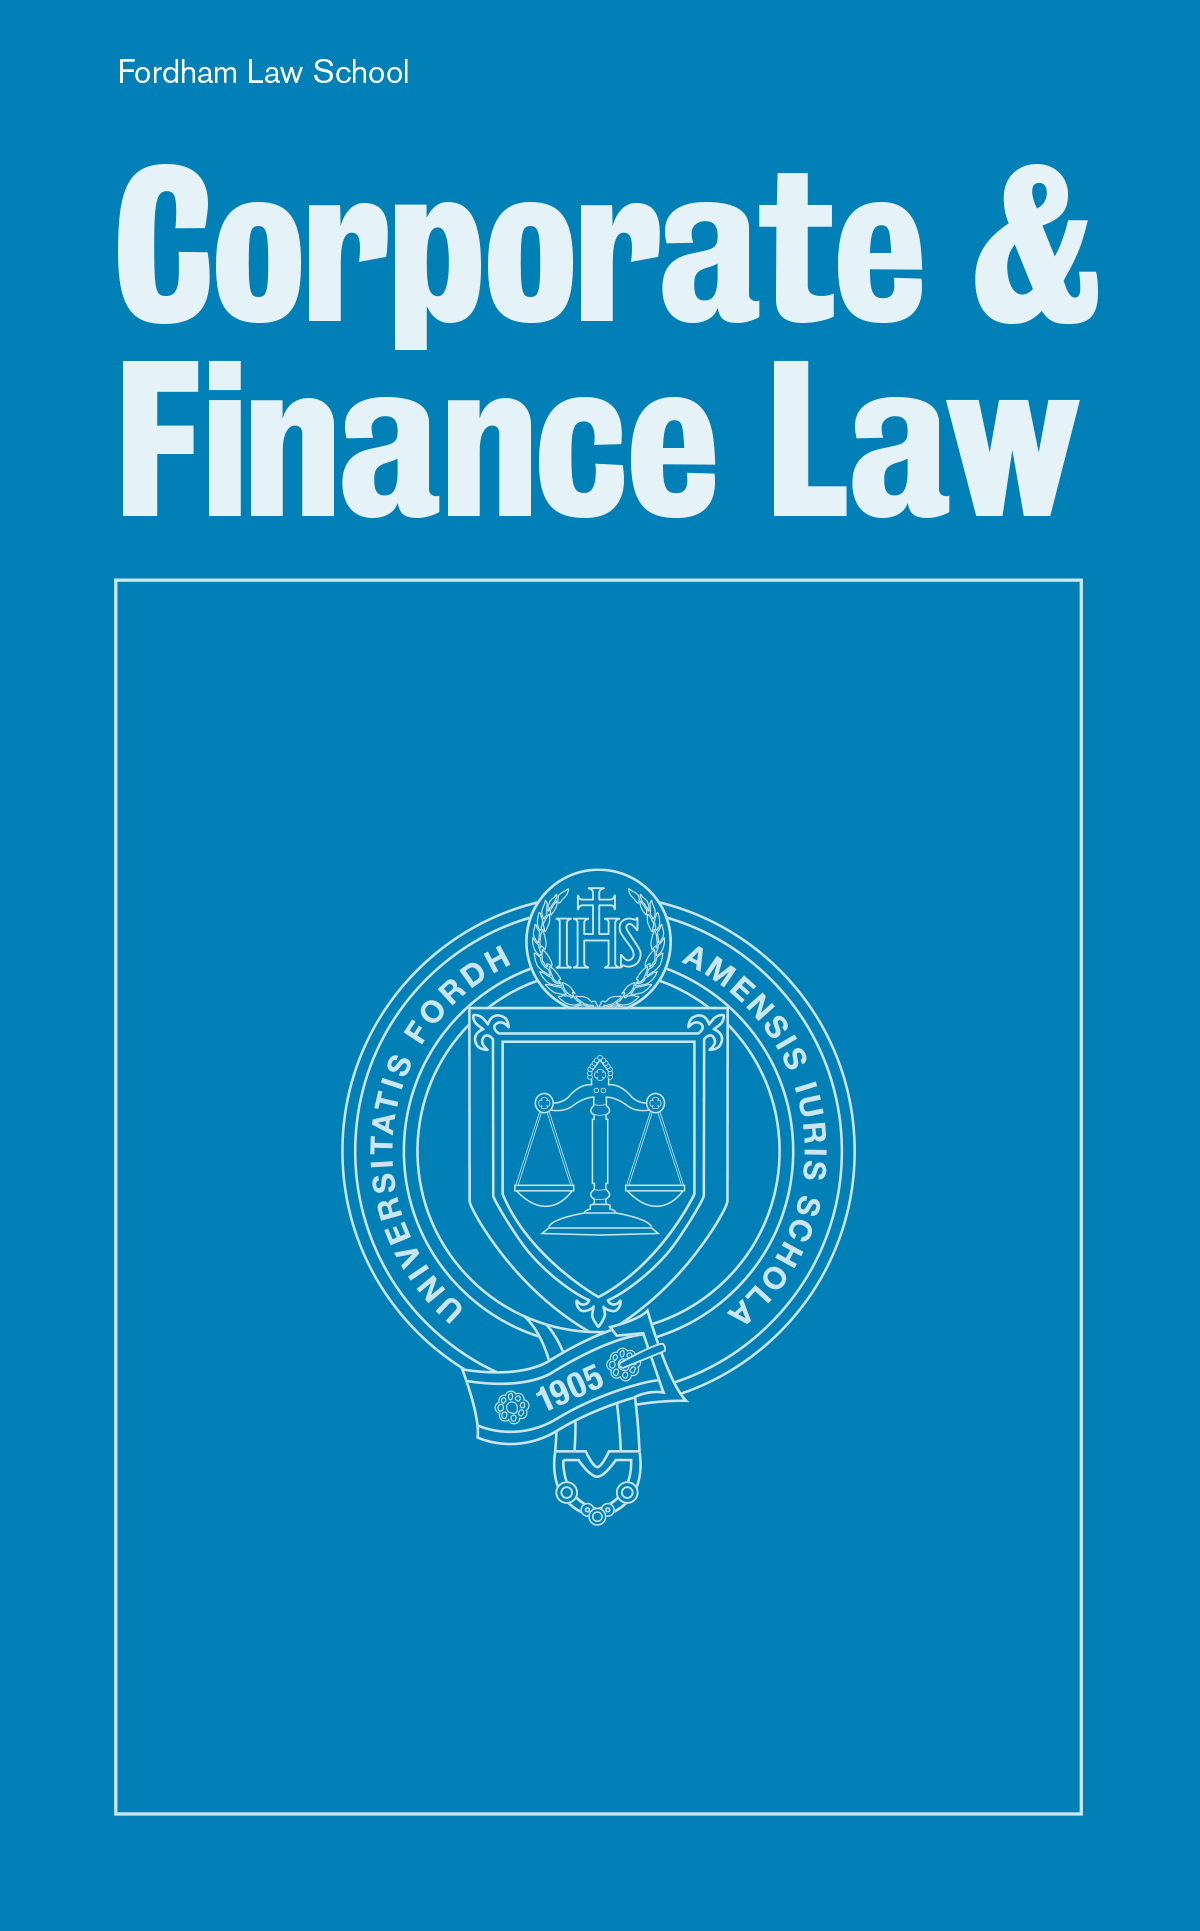 Corporate & Finance Law brochure cover